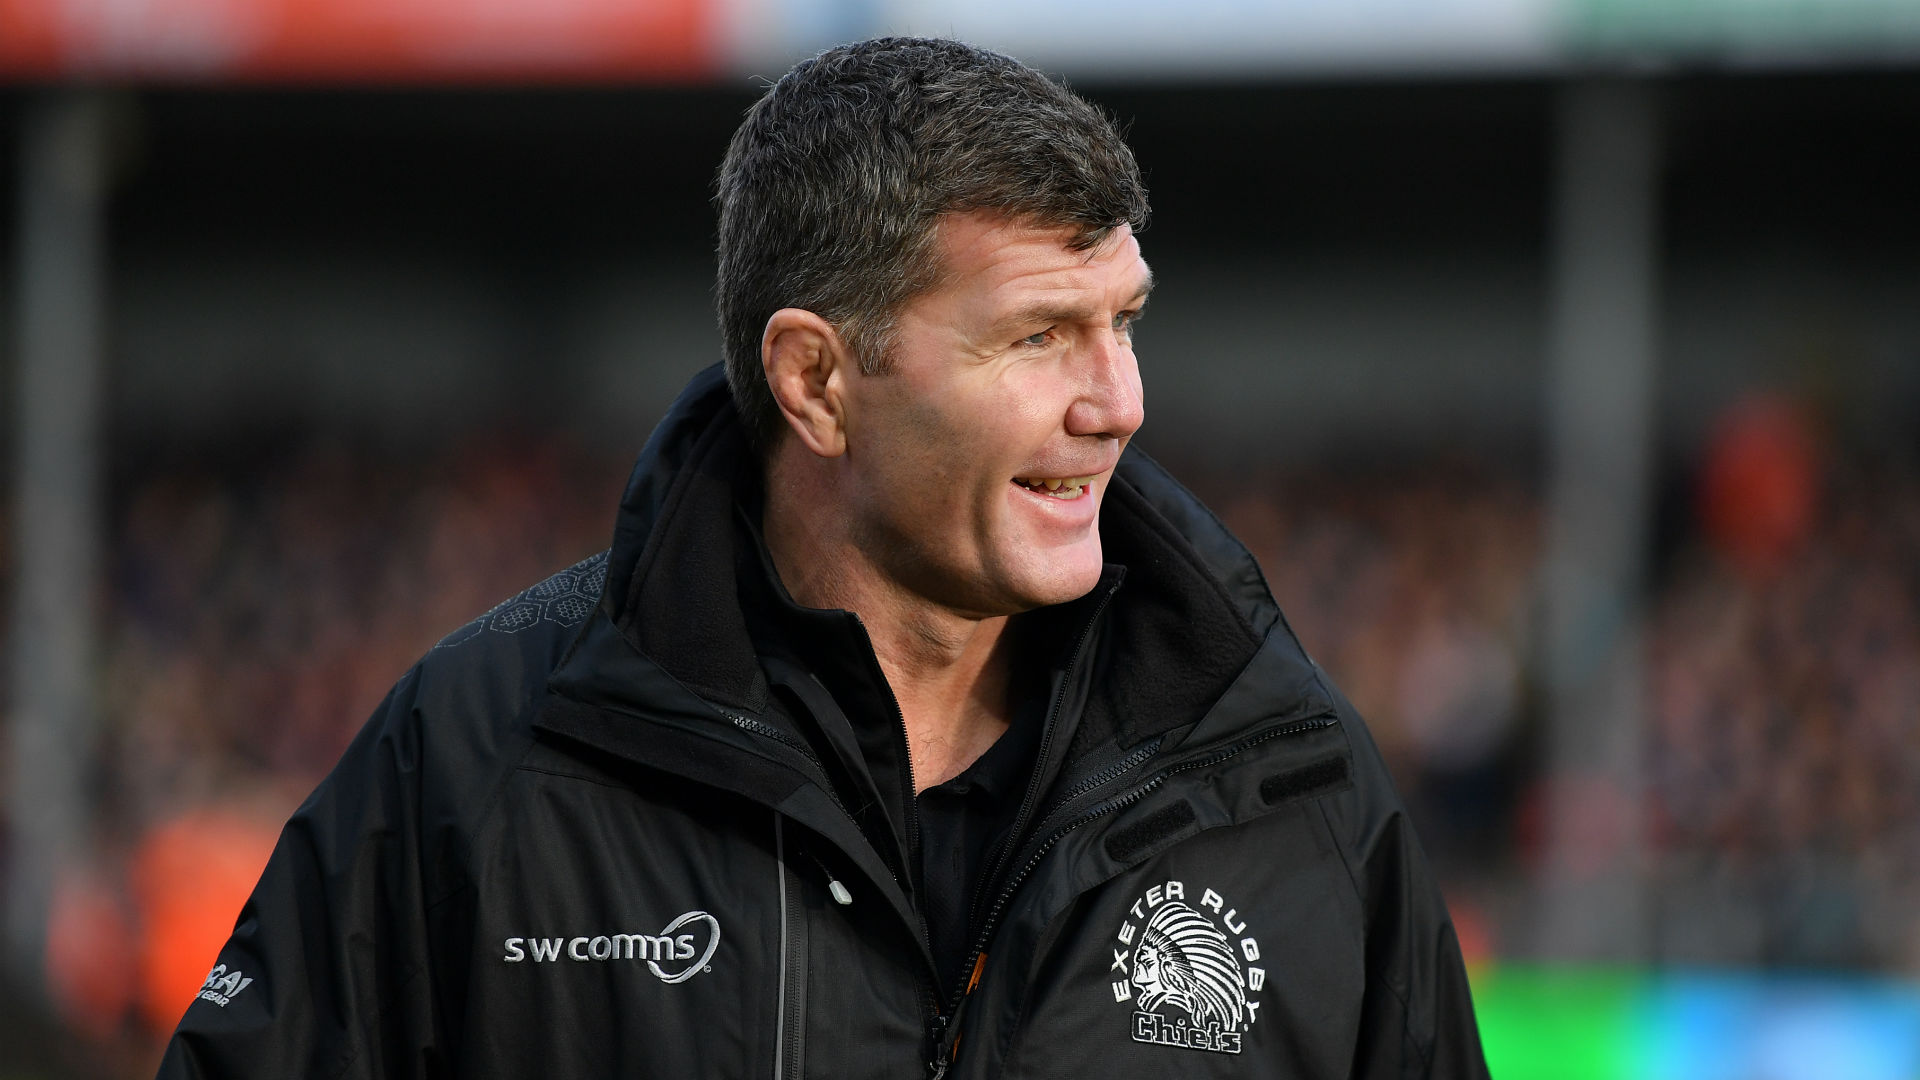 Exeter Chiefs were made to work hard for their third European Champions Cup win in a row, with Rob Baxter relieved to get over the line.